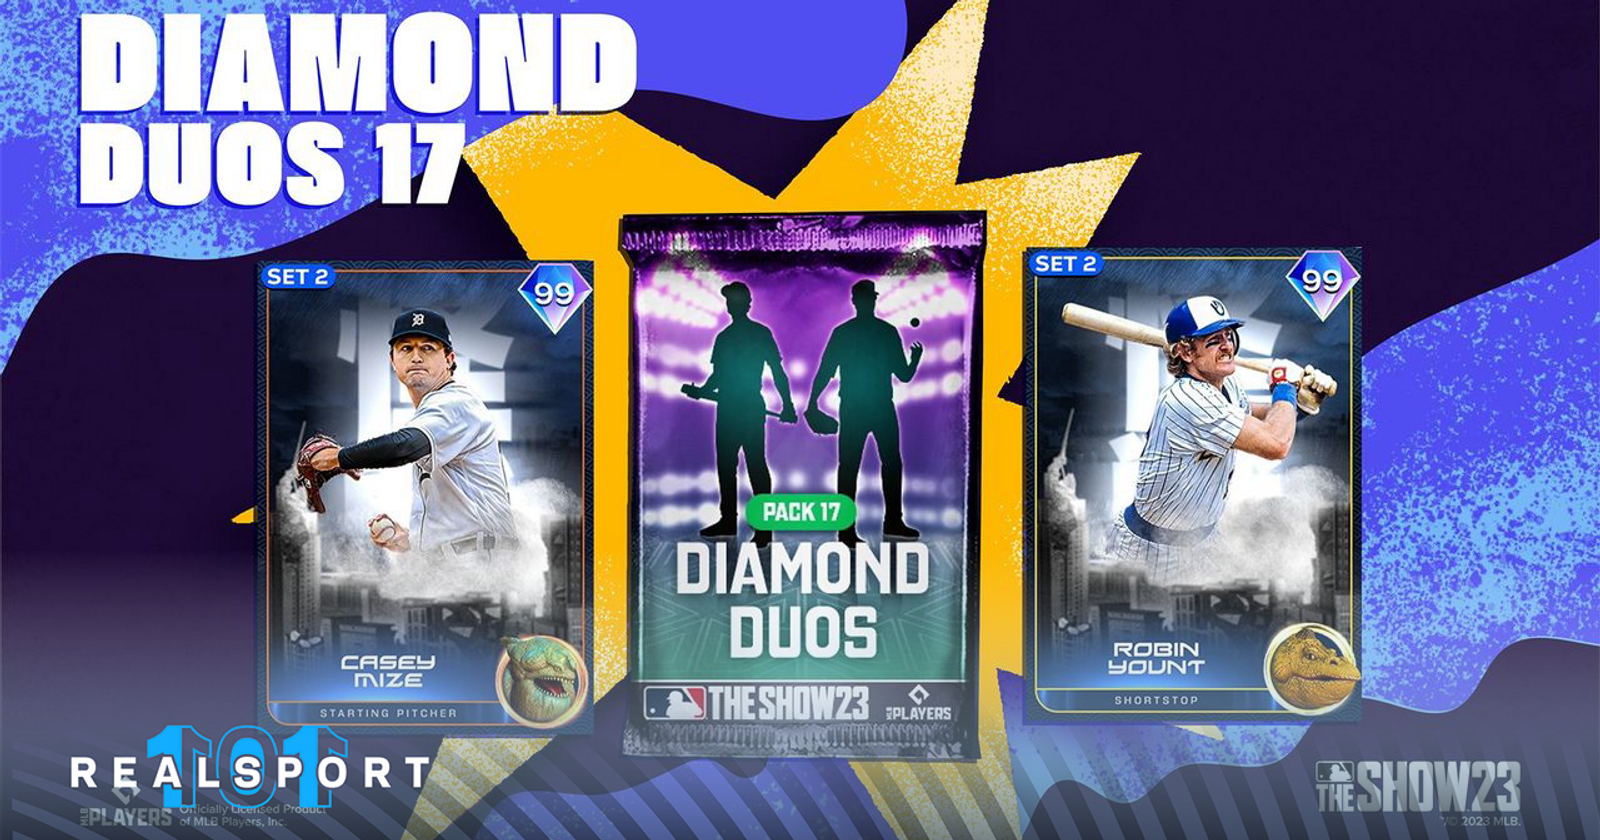 MLB The Show 23 Diamond Duos 9 pack has arrived